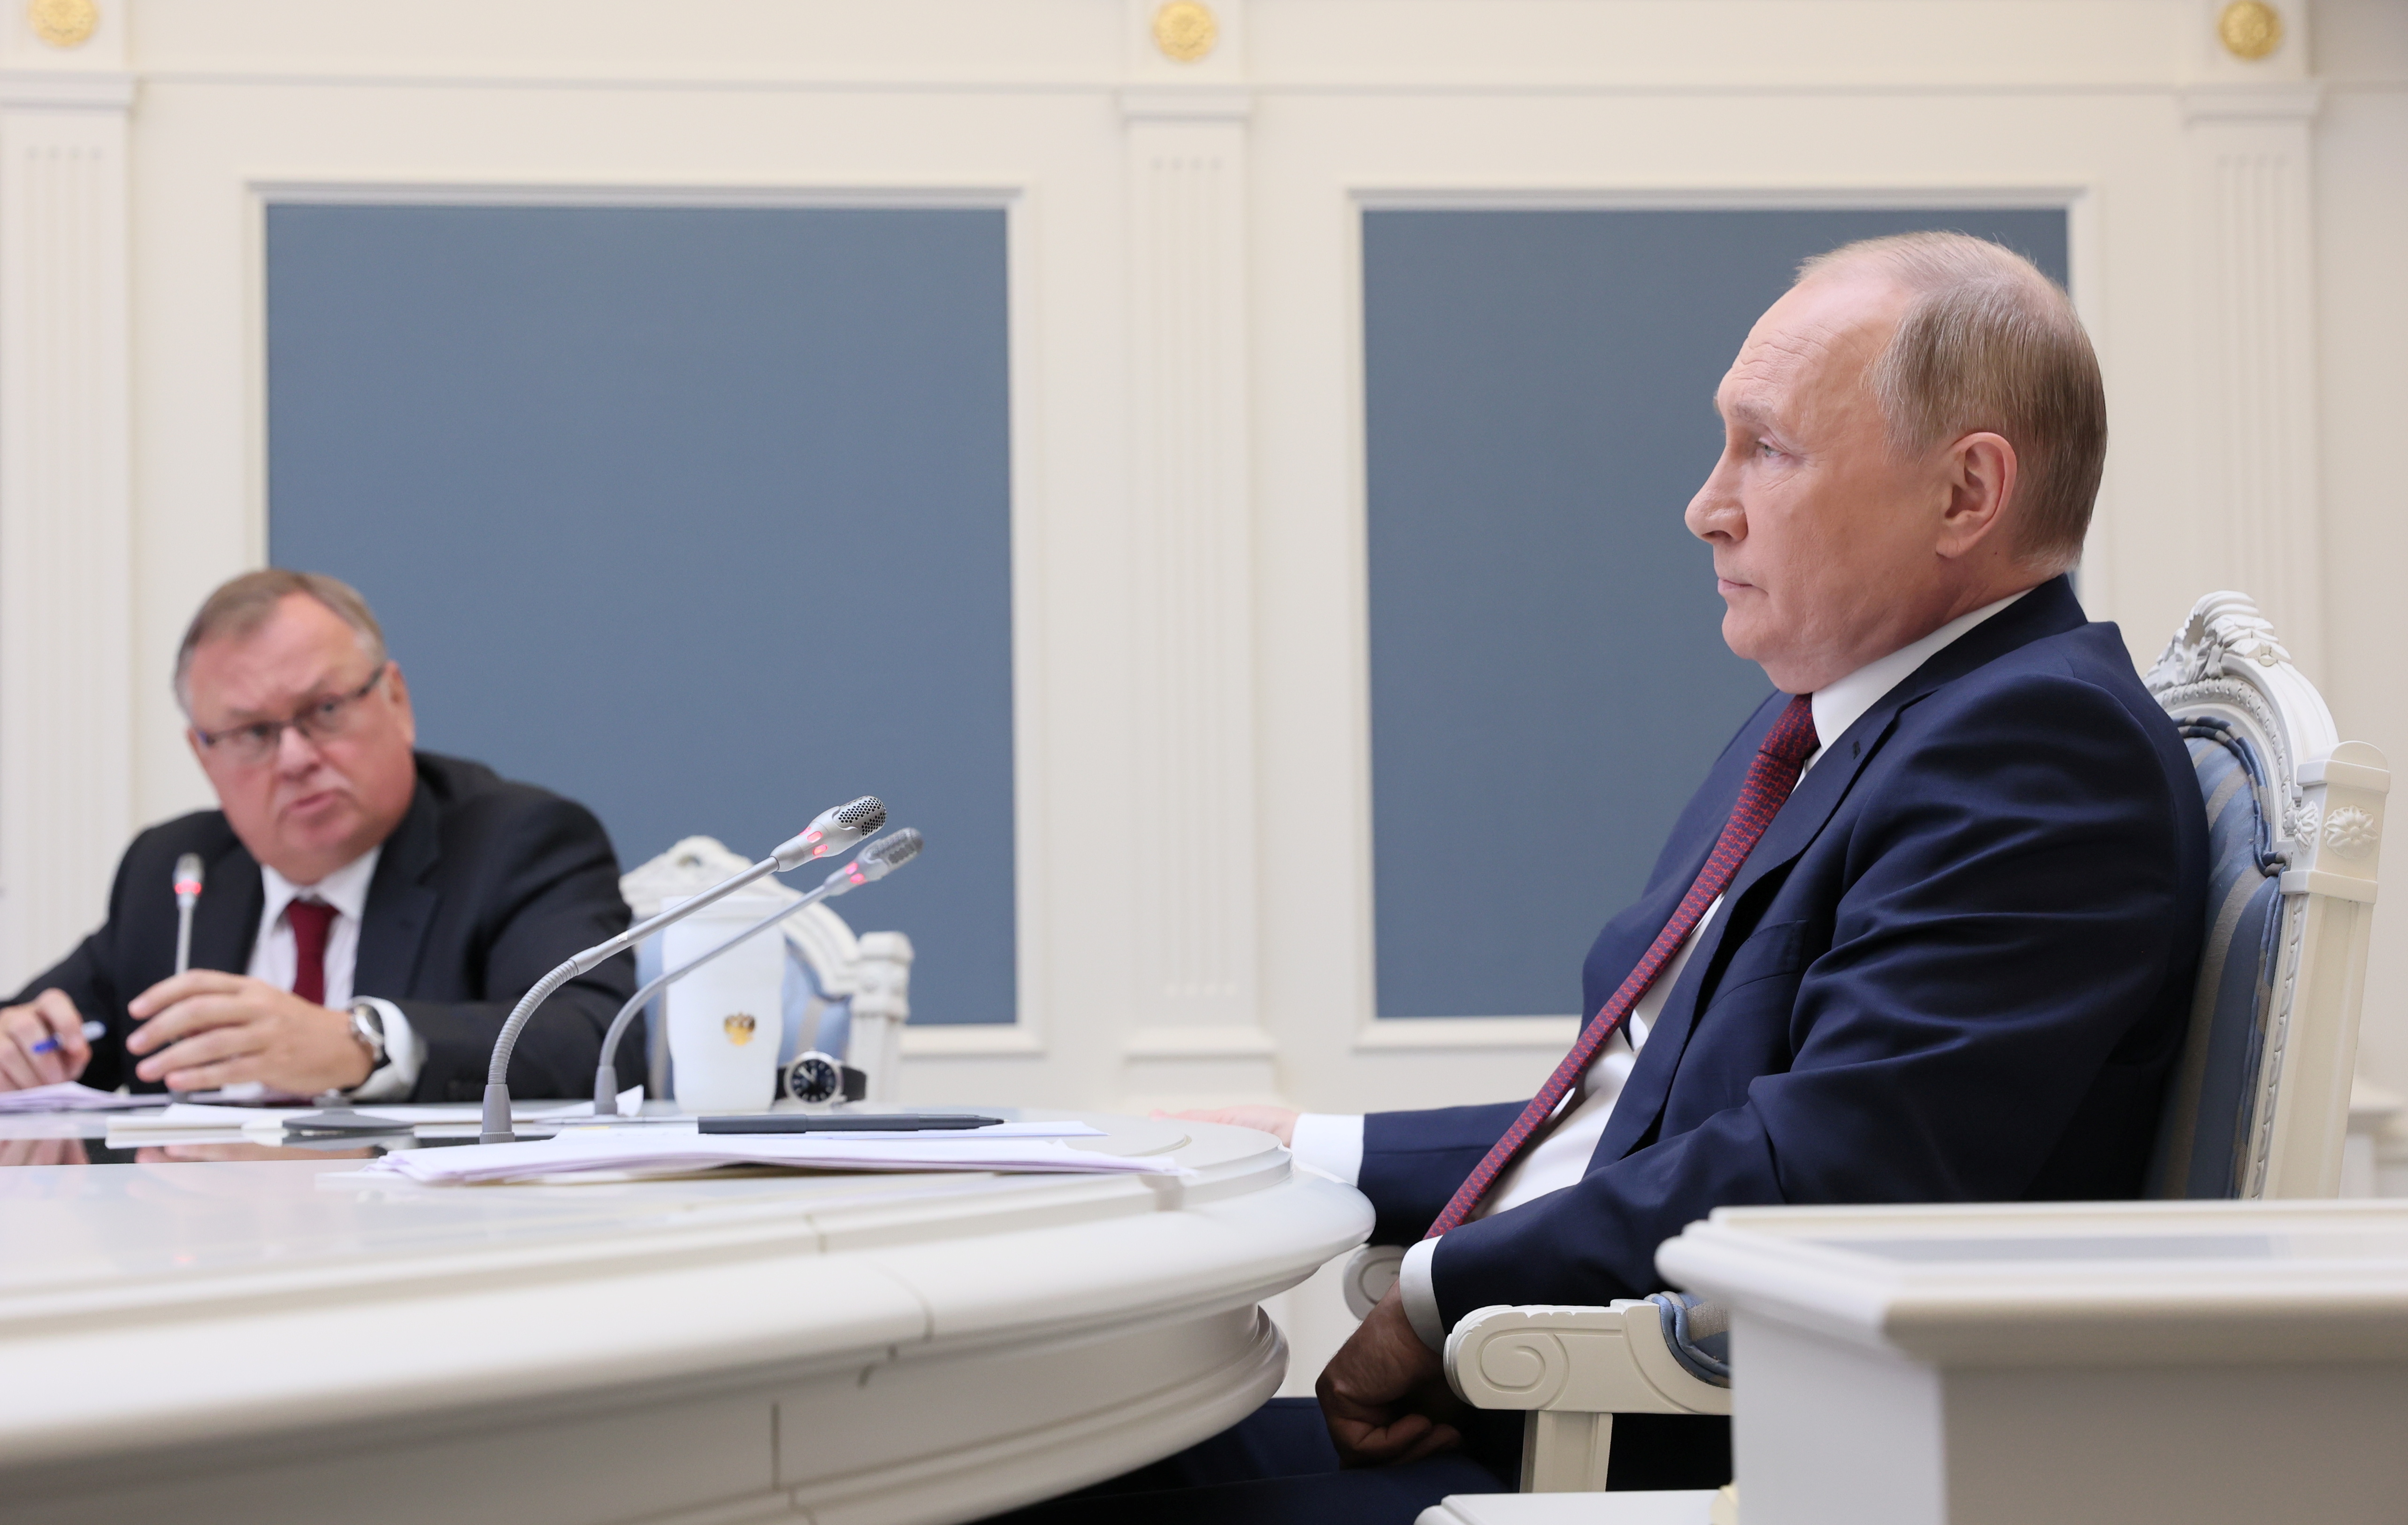 Russian President Vladimir Putin and CEO of VTB bank Andrey Kostin attend a session of the VTB Capital Investment Forum "Russia Calling!" via a video conference call in Moscow, Russia November 30, 2021. Sputnik/Mikhail Metzel/Pool via REUTERS  